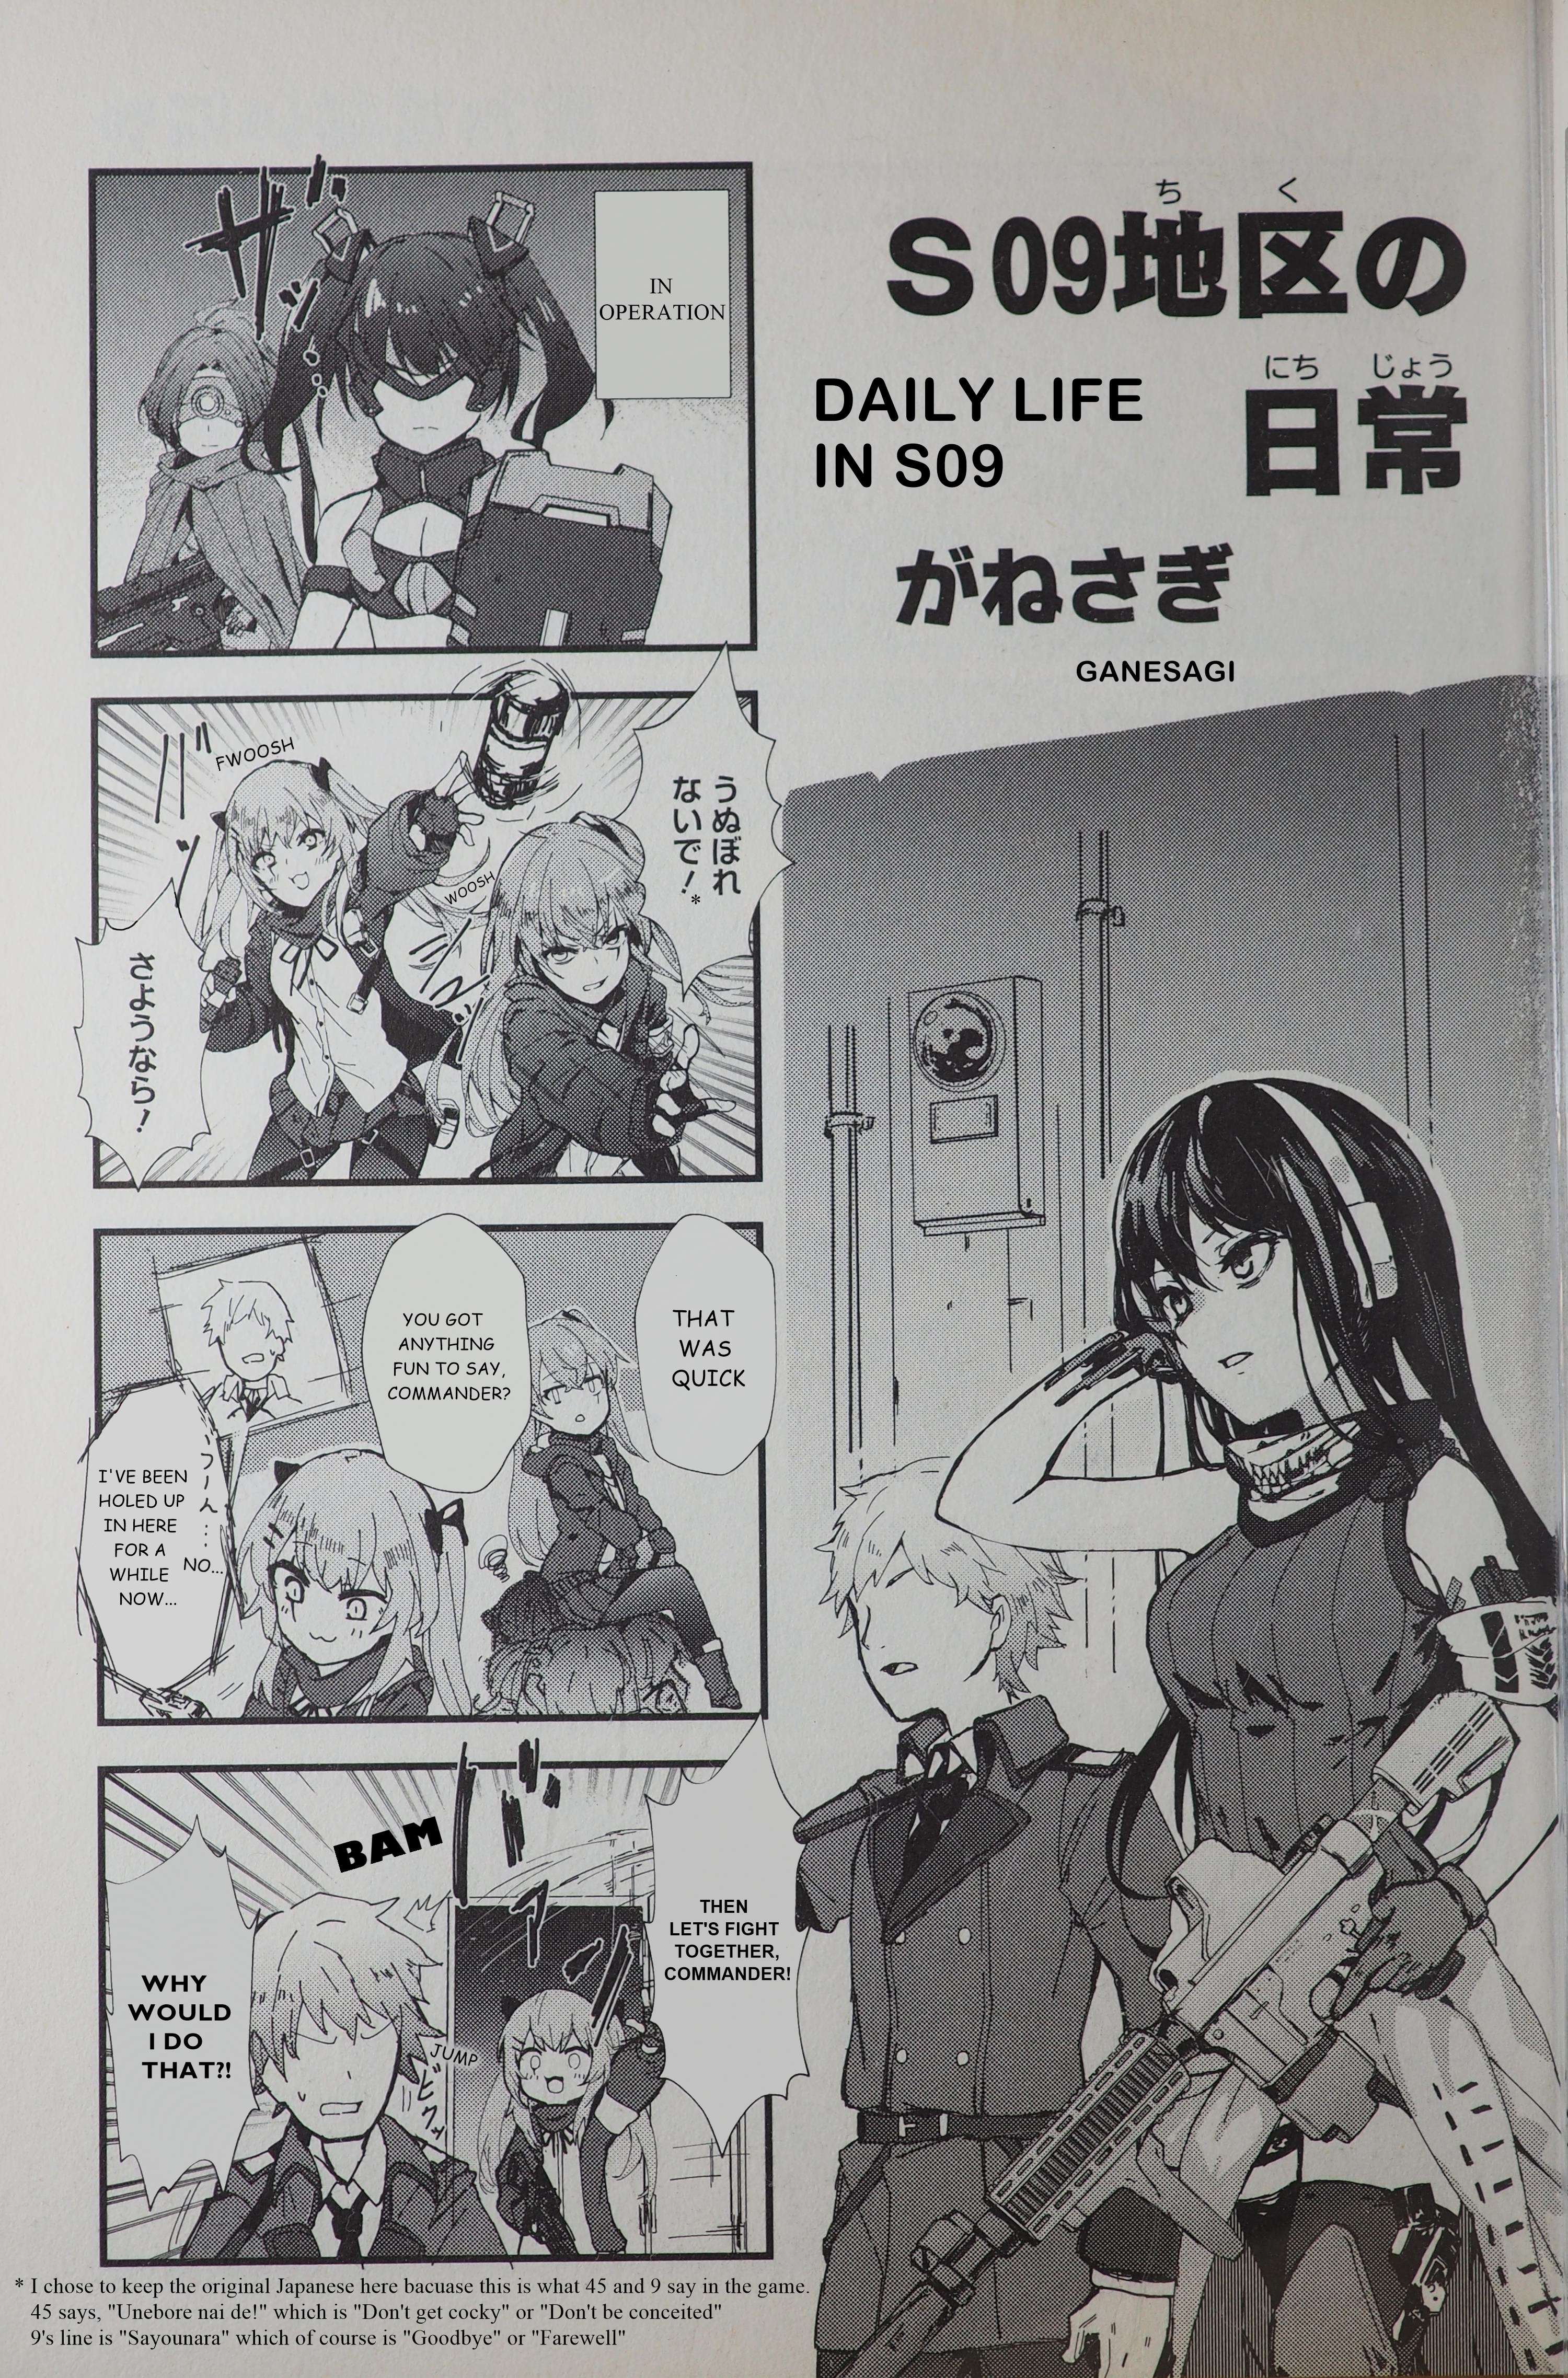 Dolls Frontline Comic Anthology - DNA Media 2019 - Chapter 14143 - Daily Life in Sector 09 - Image 1